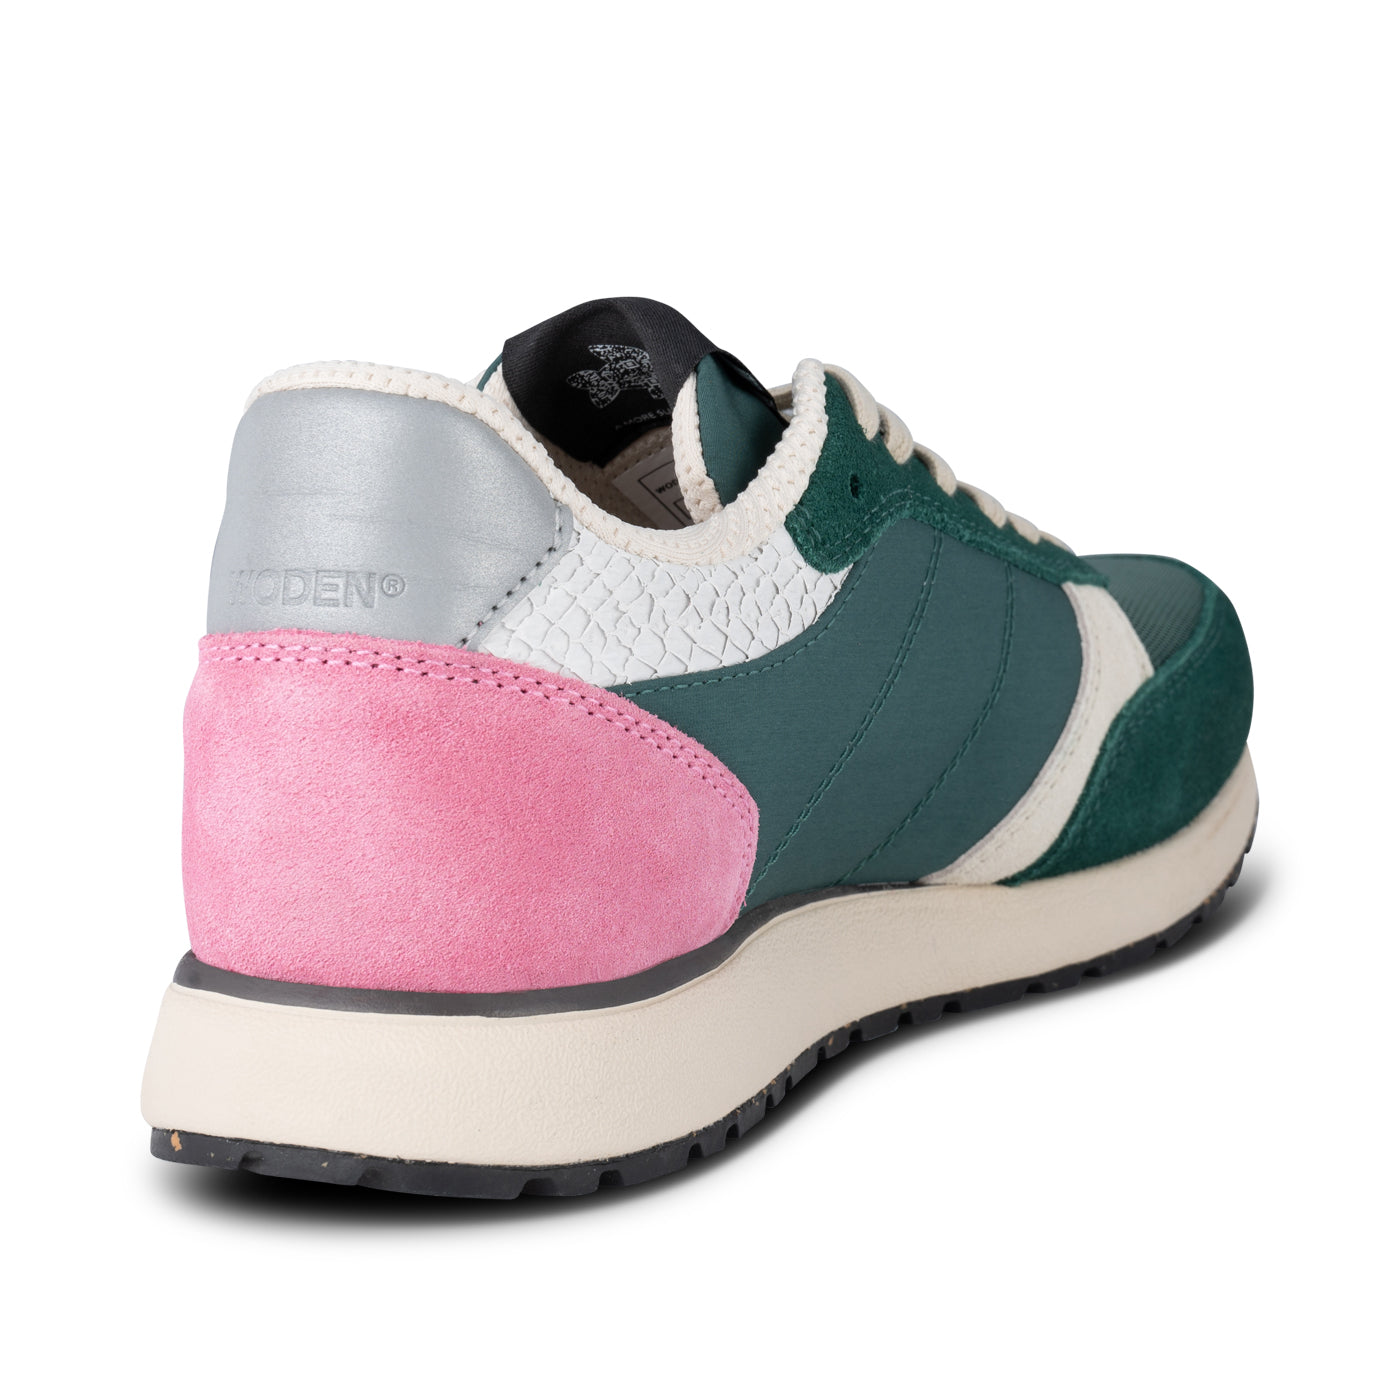 WODEN Ronja Reflective Sneakers 139 Deep Forest